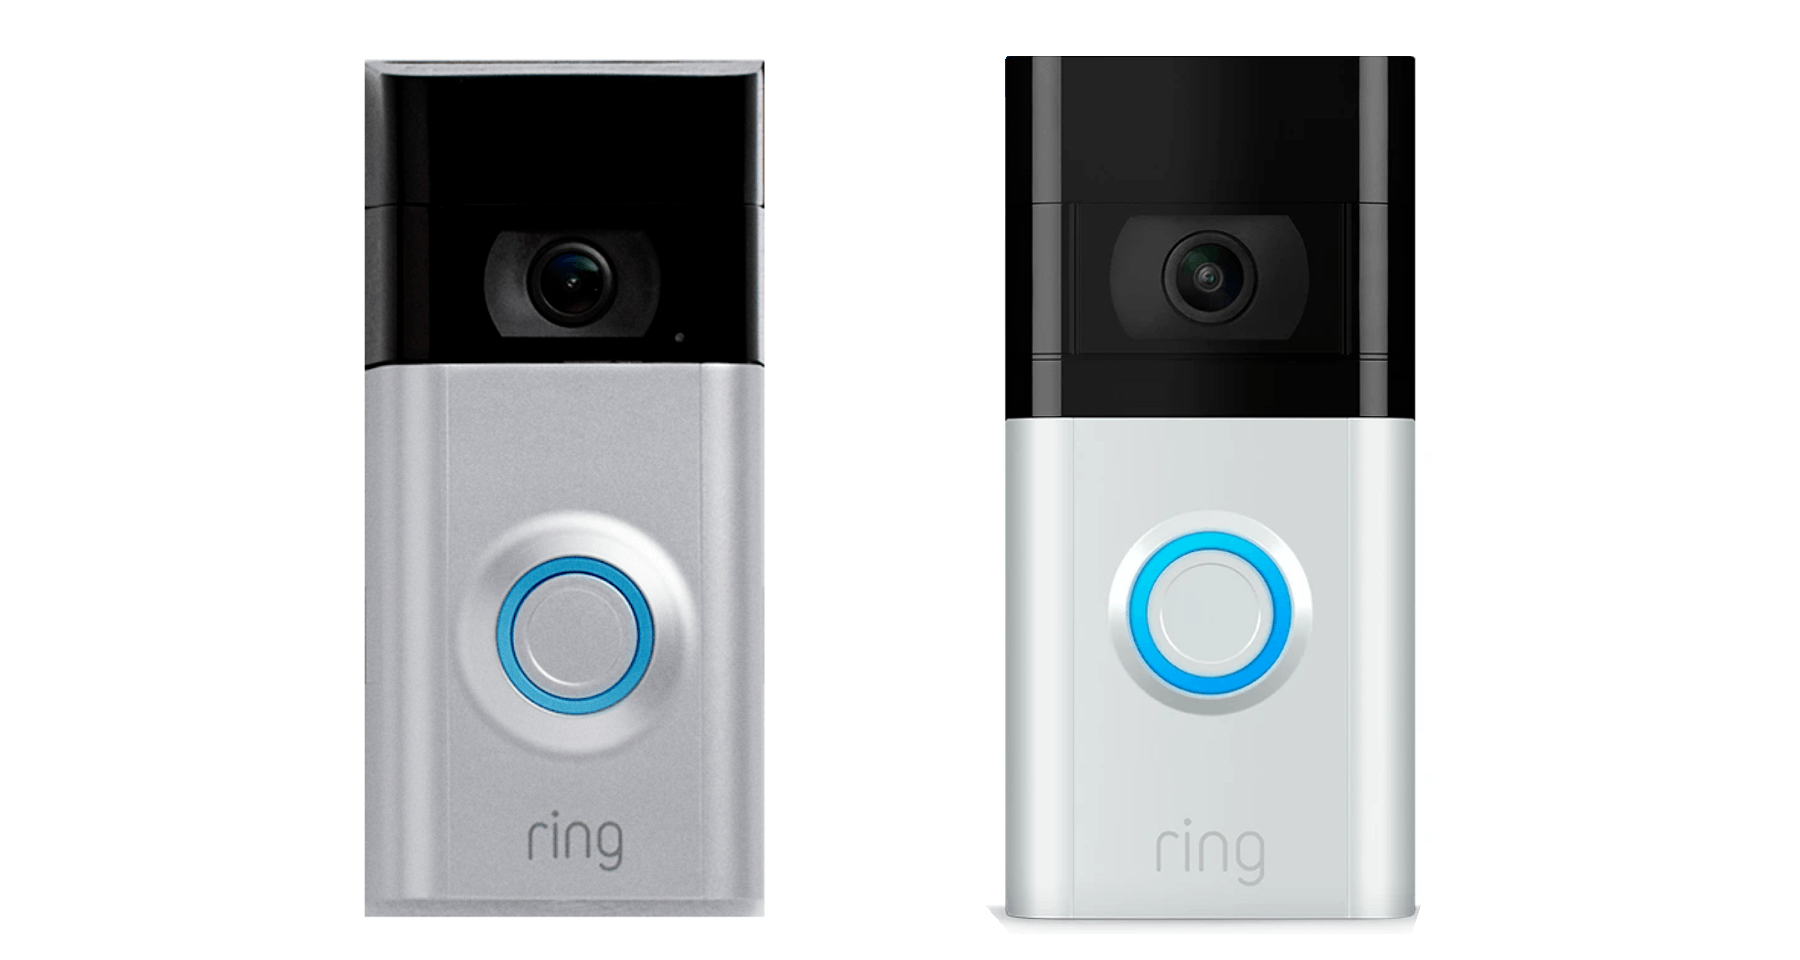 Can You Have Two Ring Doorbells at Different Locations